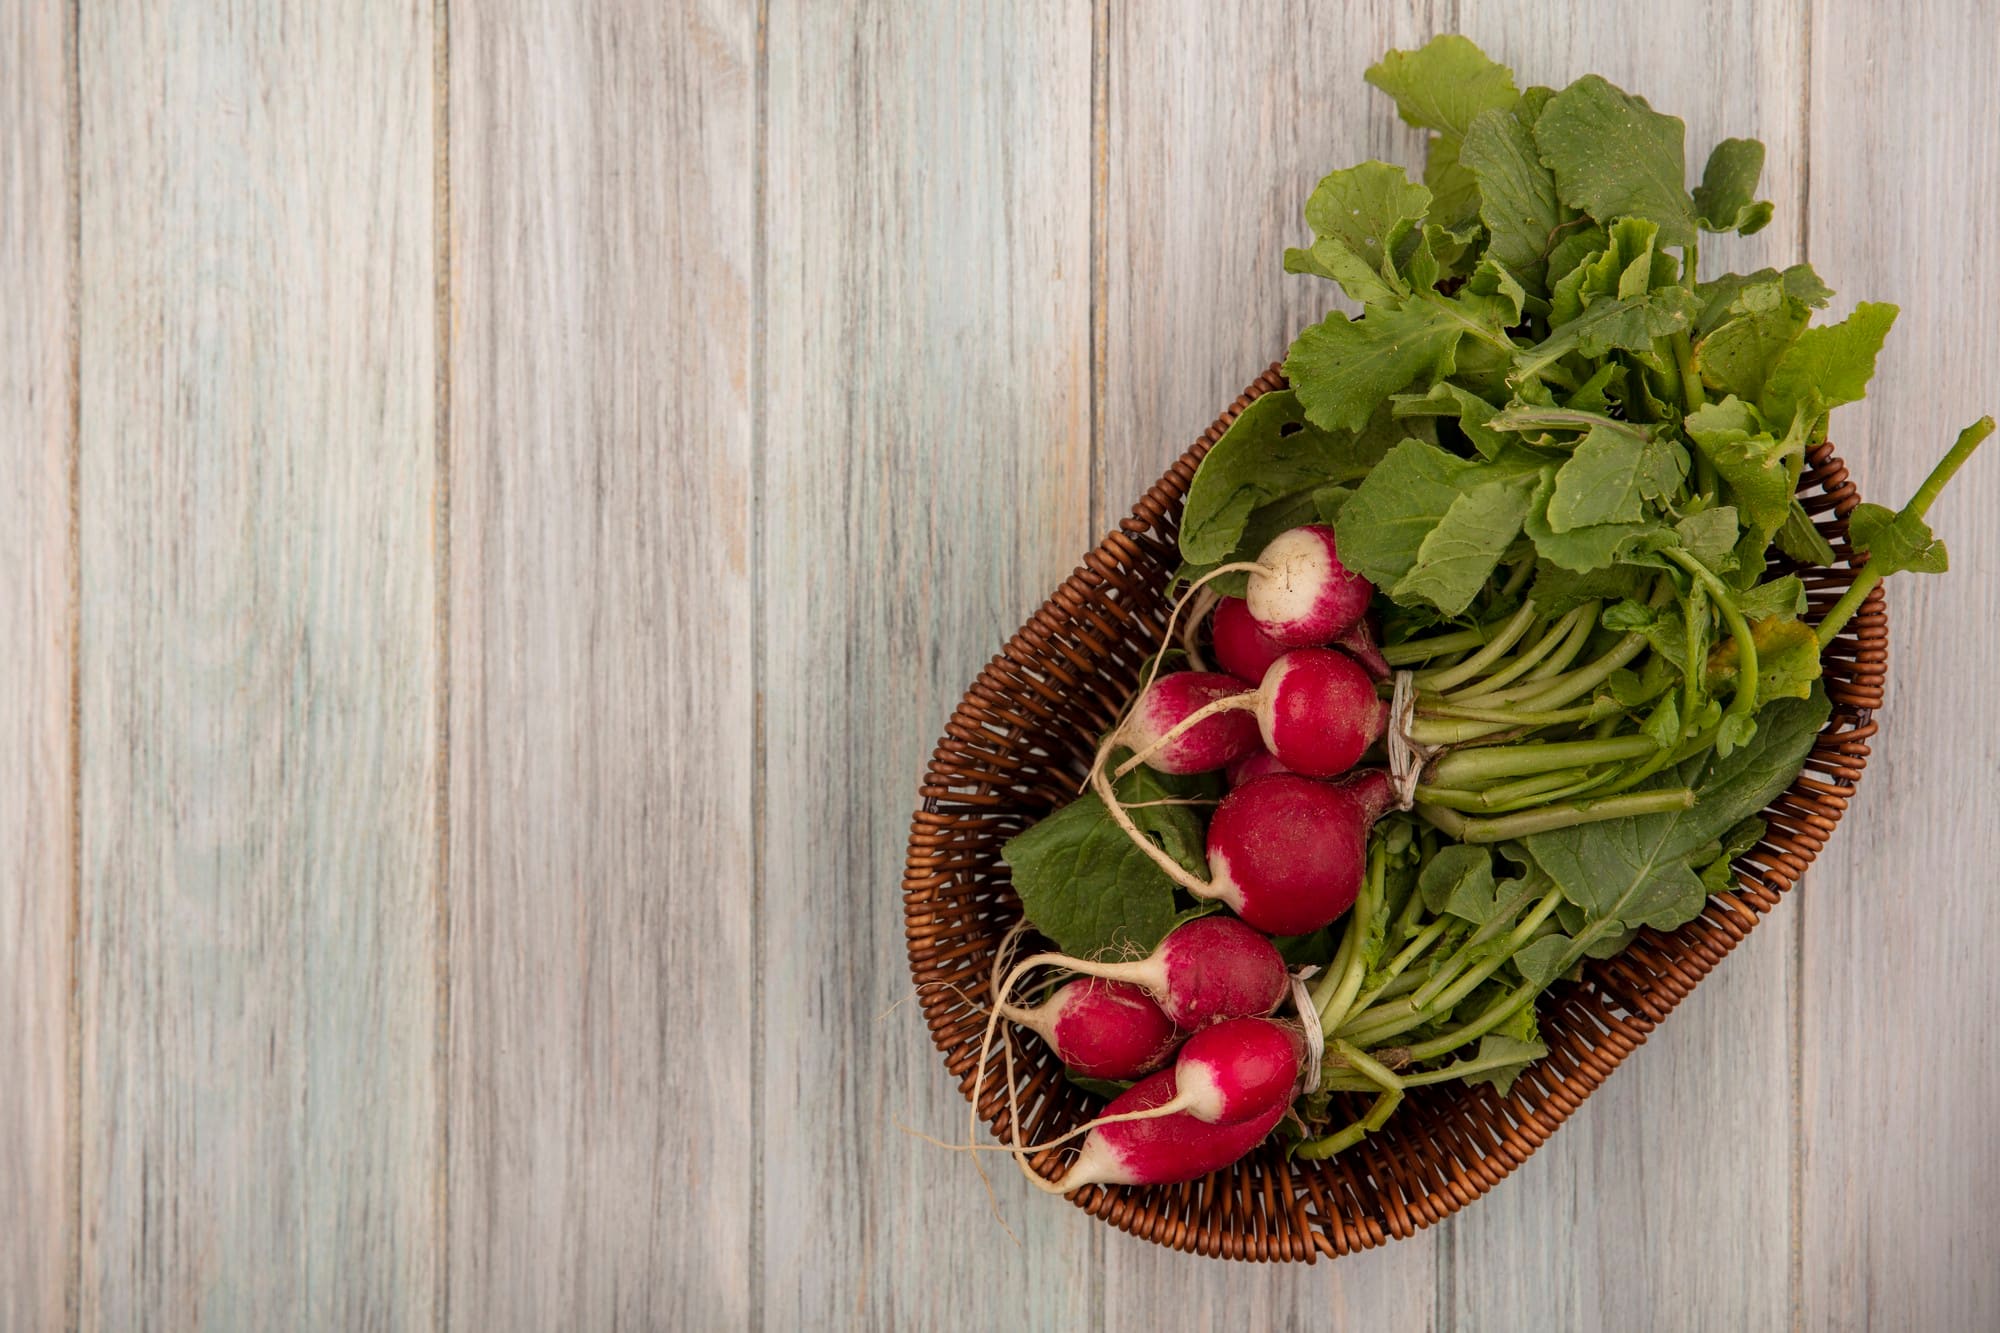 Embracing the nutritional powerhouse : Beet greens